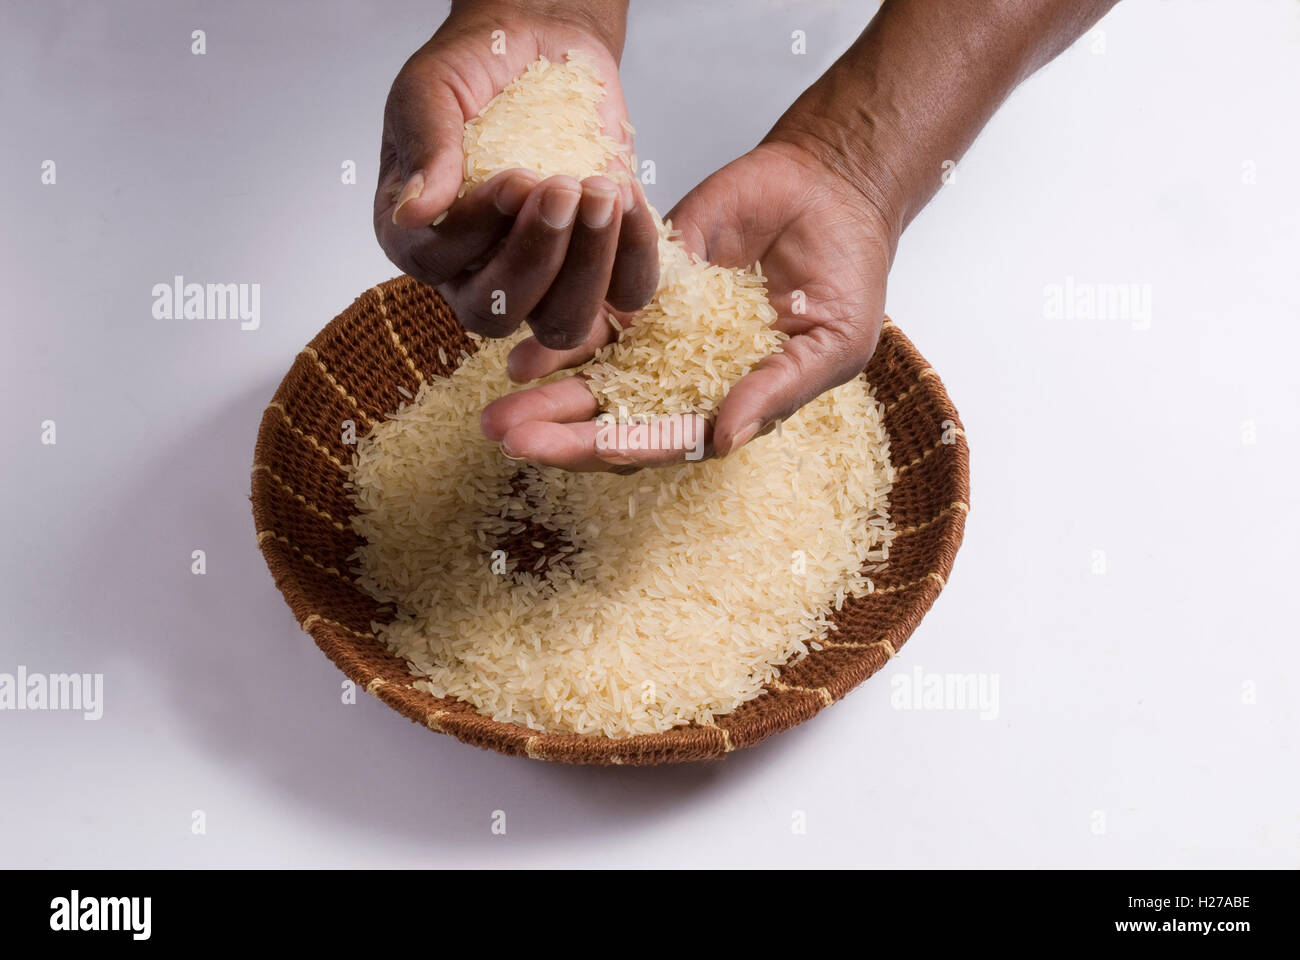 African's hands pouring rice over a woven grass bowl, Studio shot on white background. Stock Photo